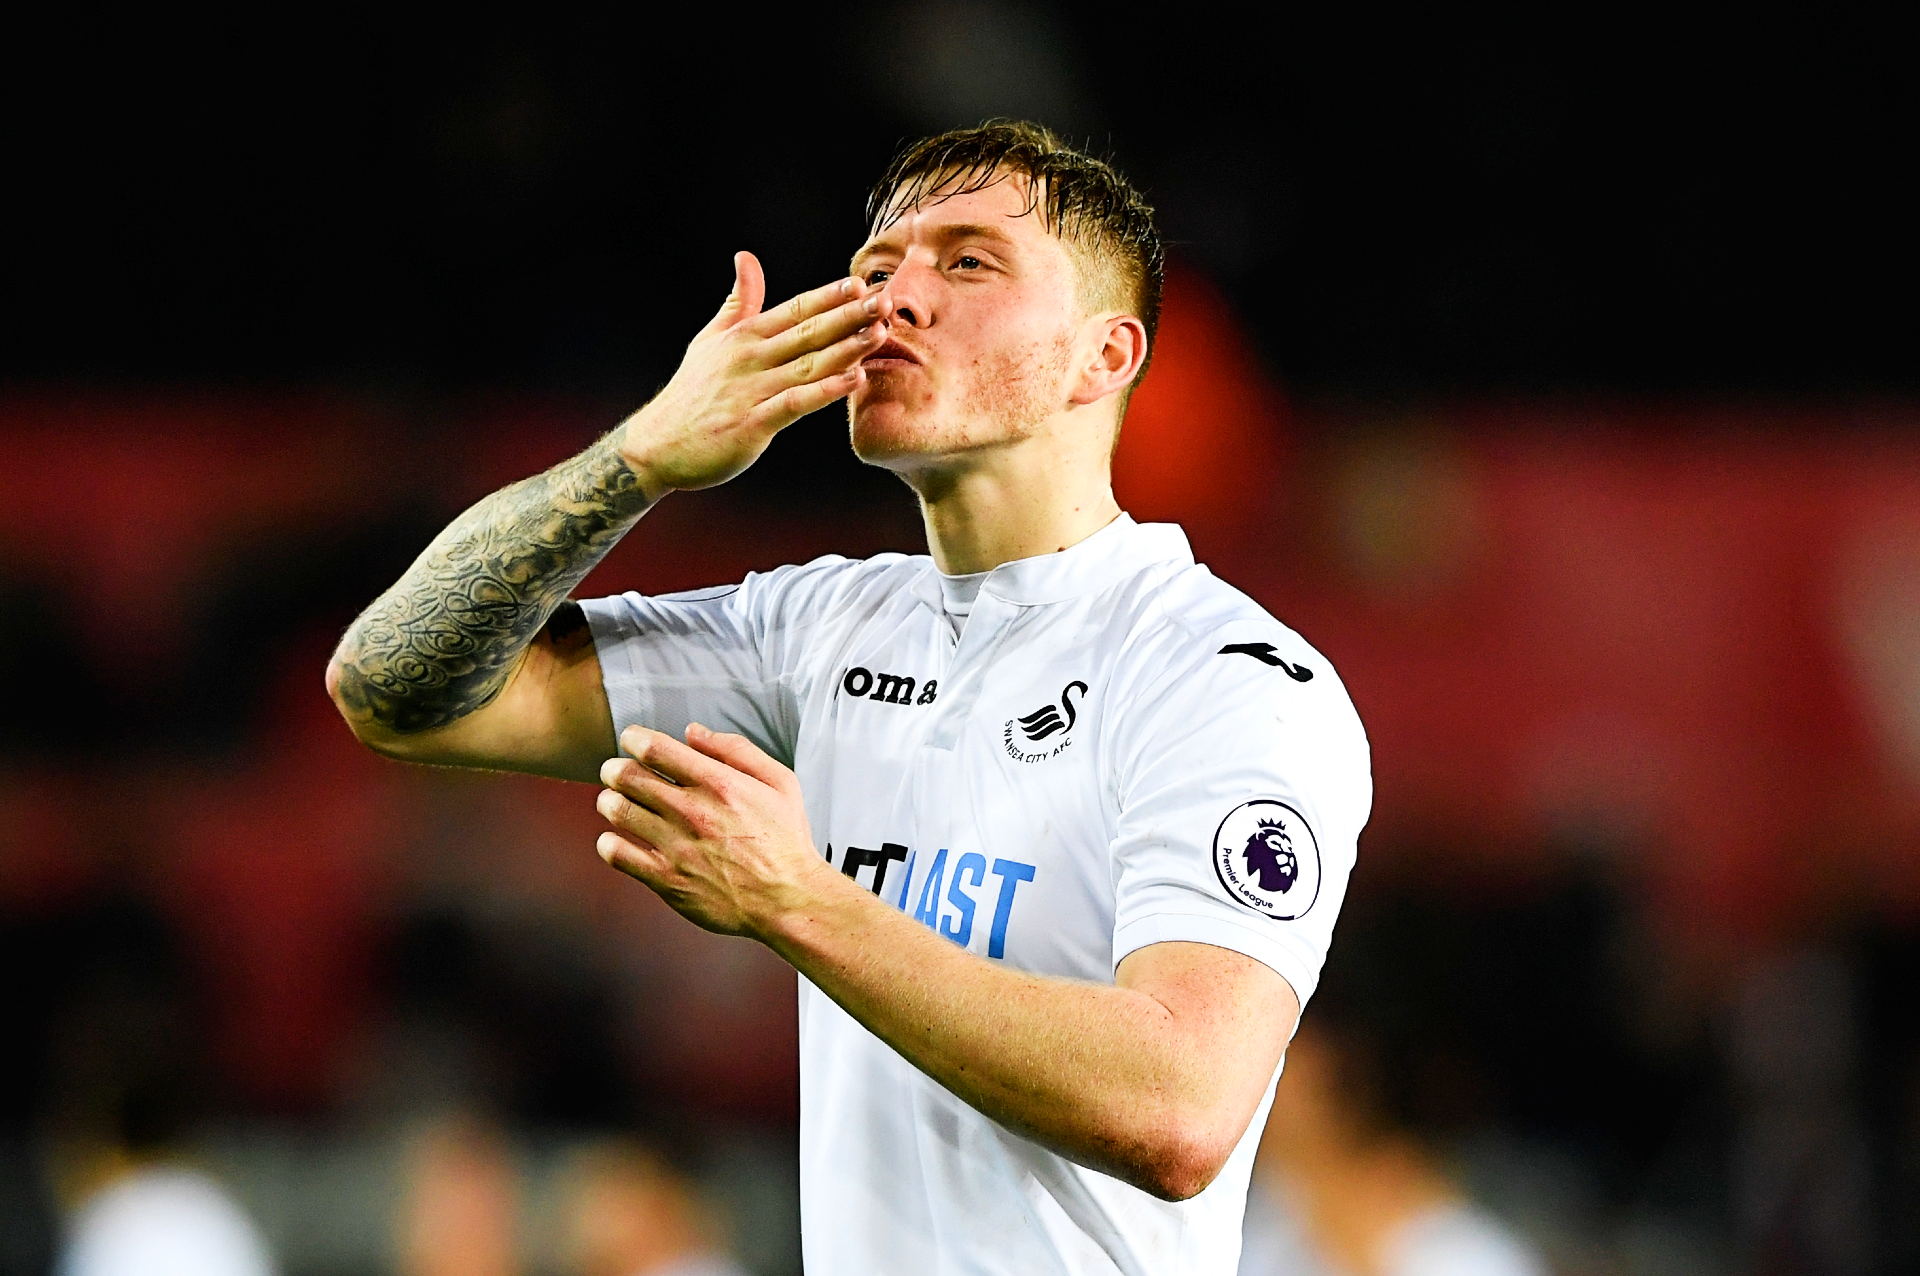 Alfie Mawson spent two seasons with Swansea City in the Premier League